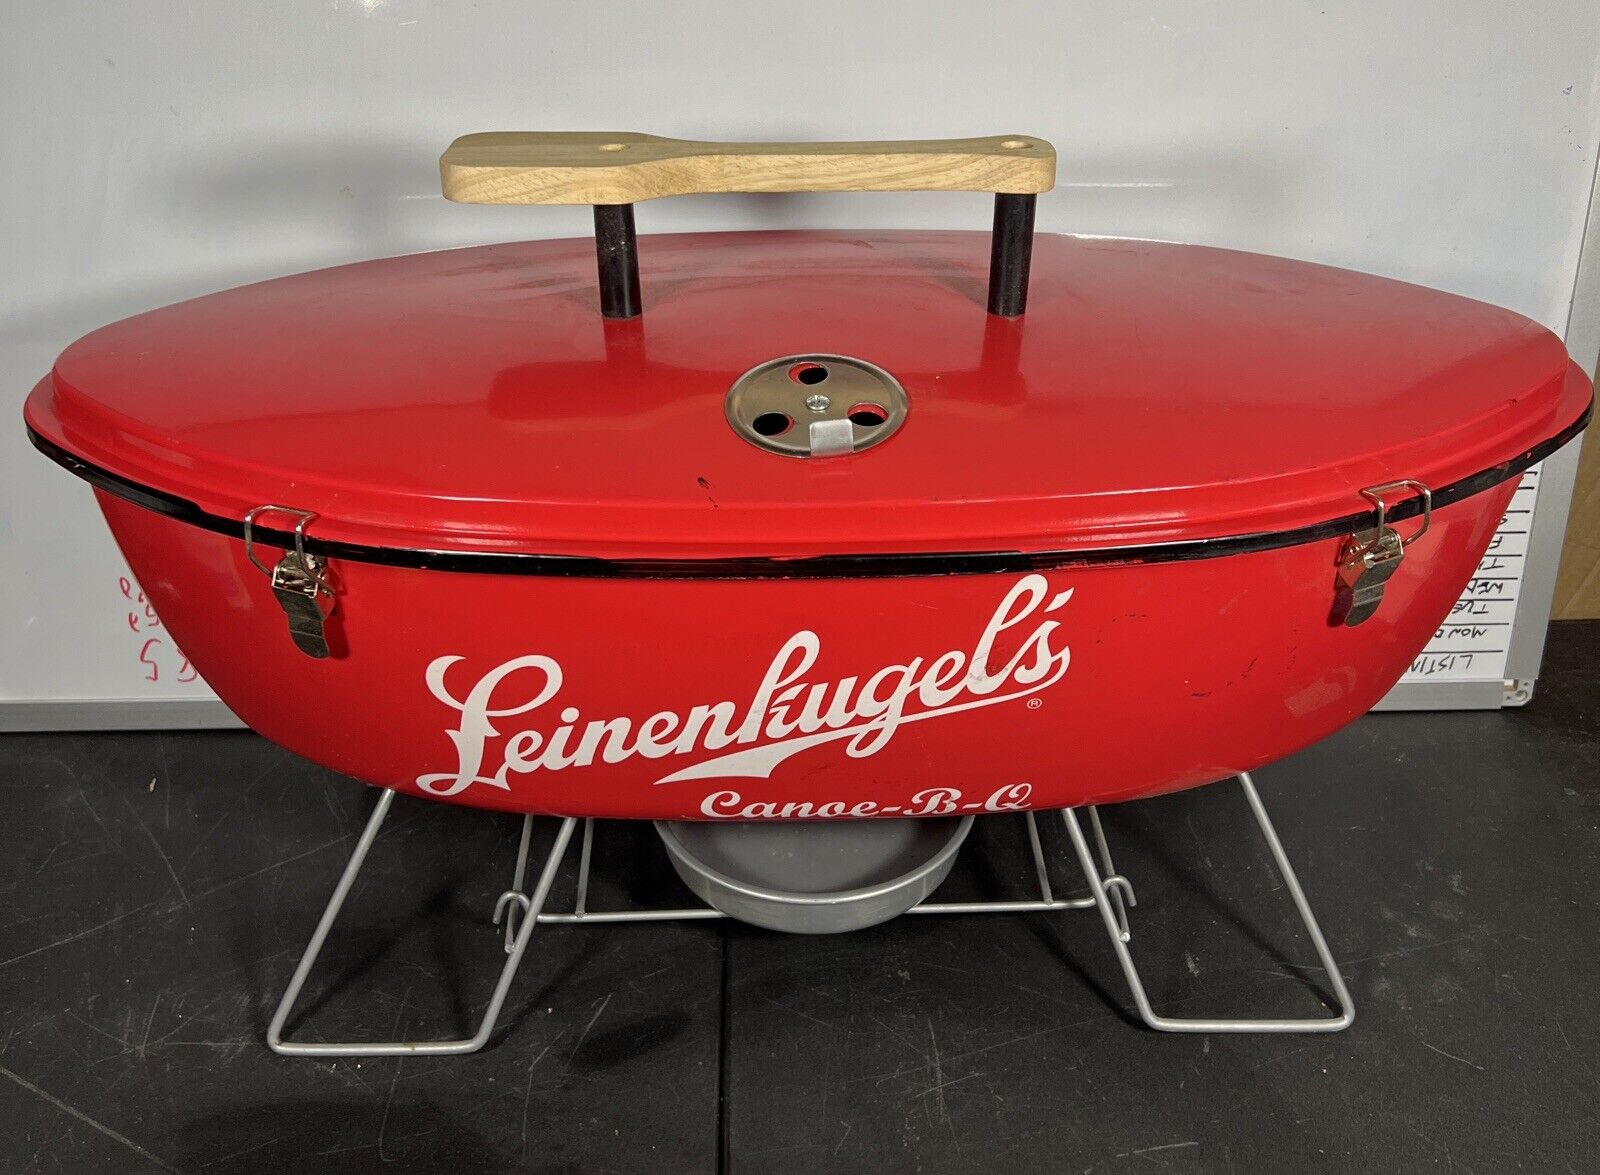 RARE - Leinenkugel's Canoe B-Q Grill Never Used Brewery Collectible Fire BBQ